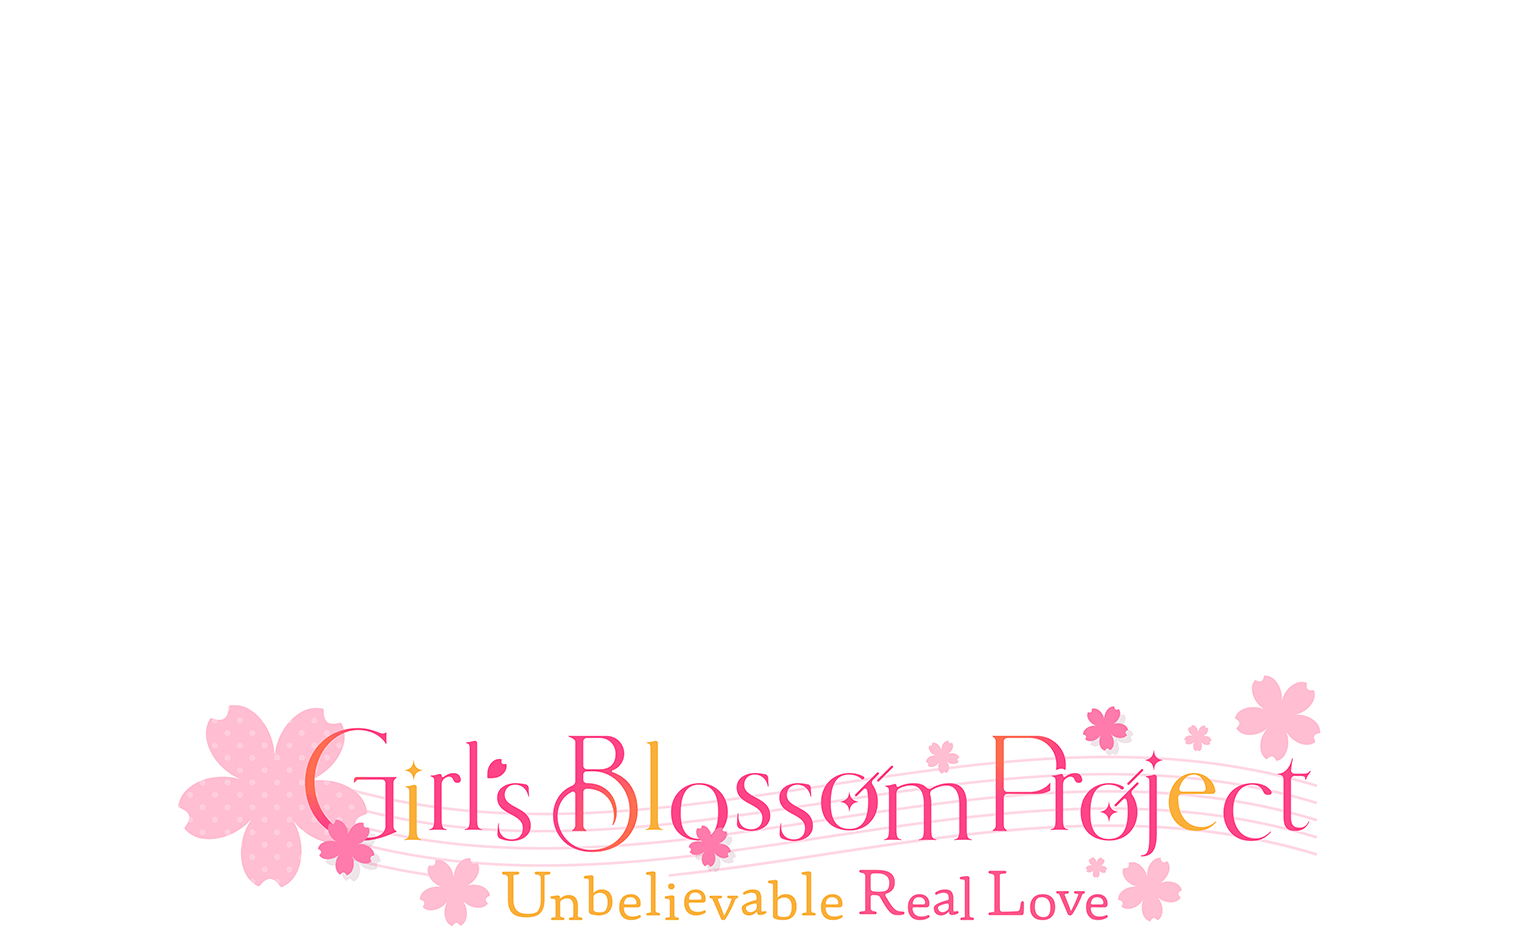 Girl's Blossom Project -Unbelievable Real Love-

